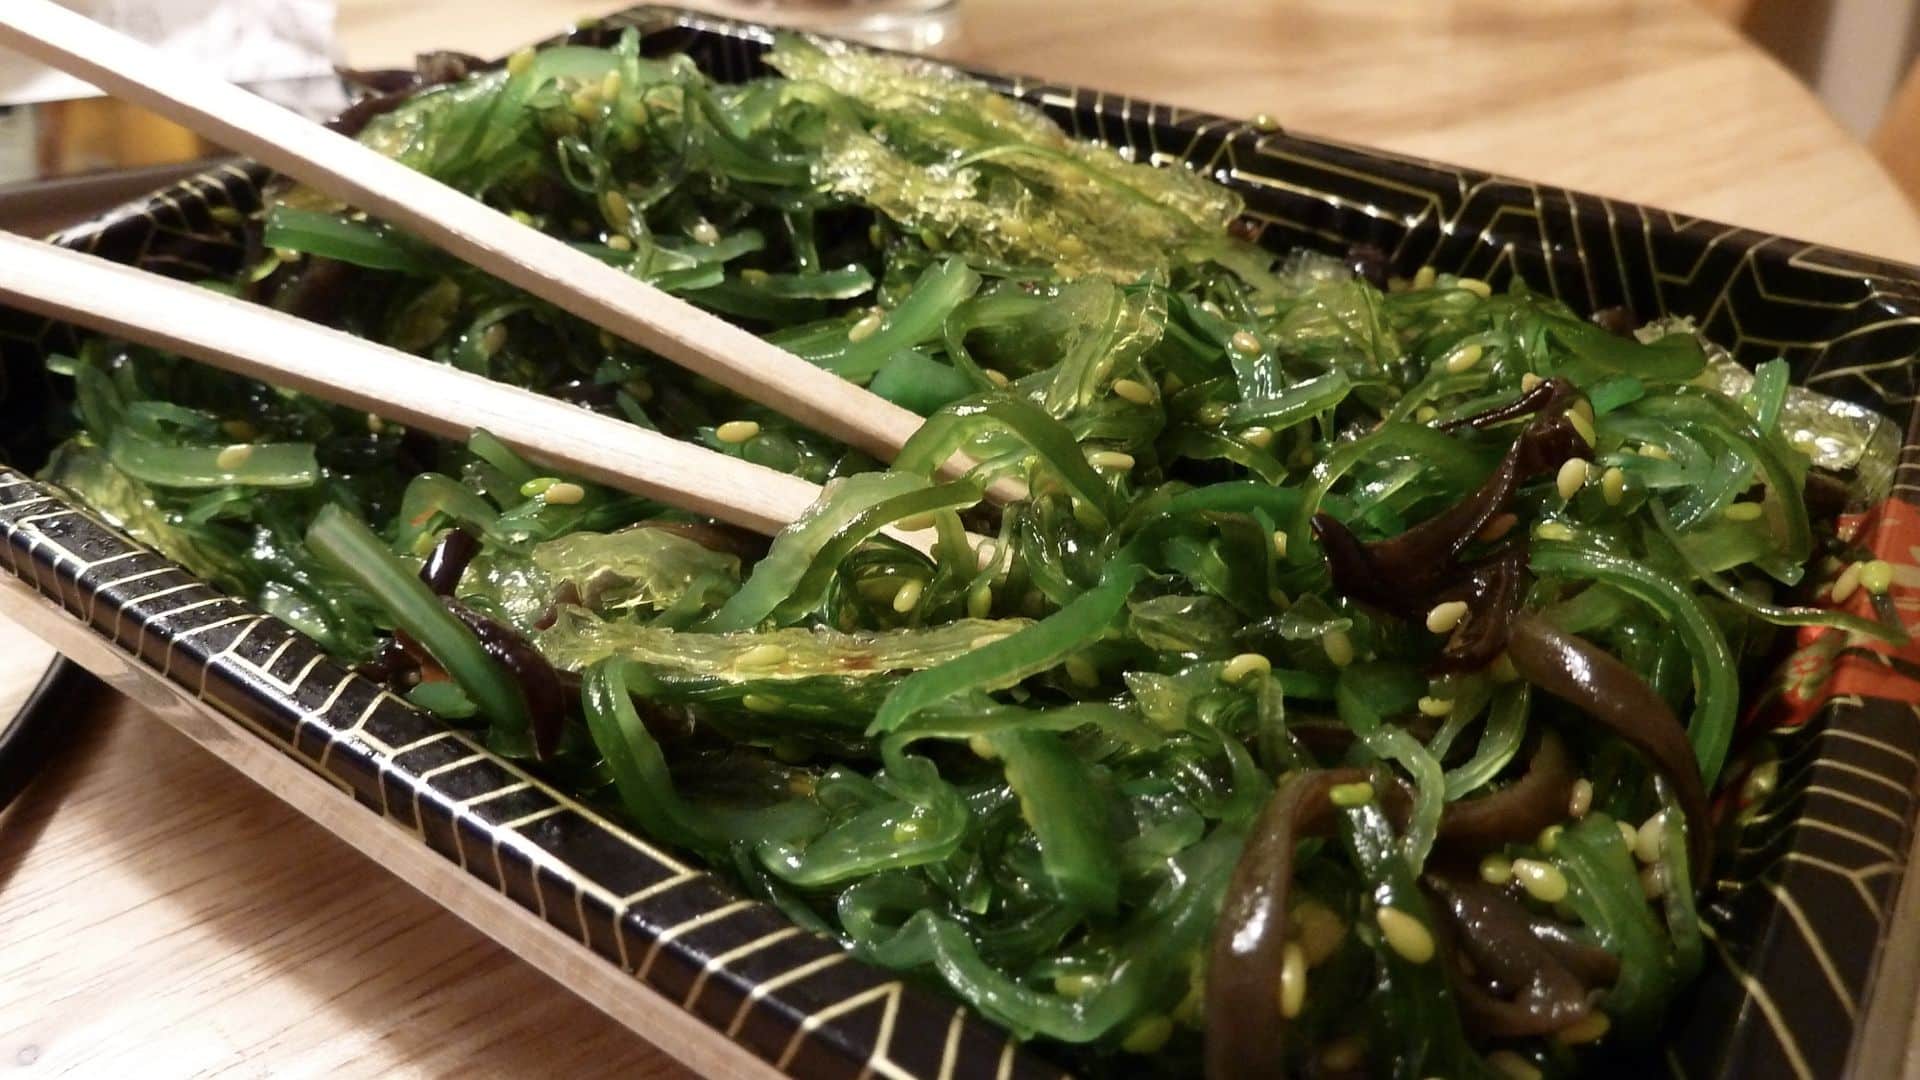 How to Boost Your Immune System with Wakame Seaweed